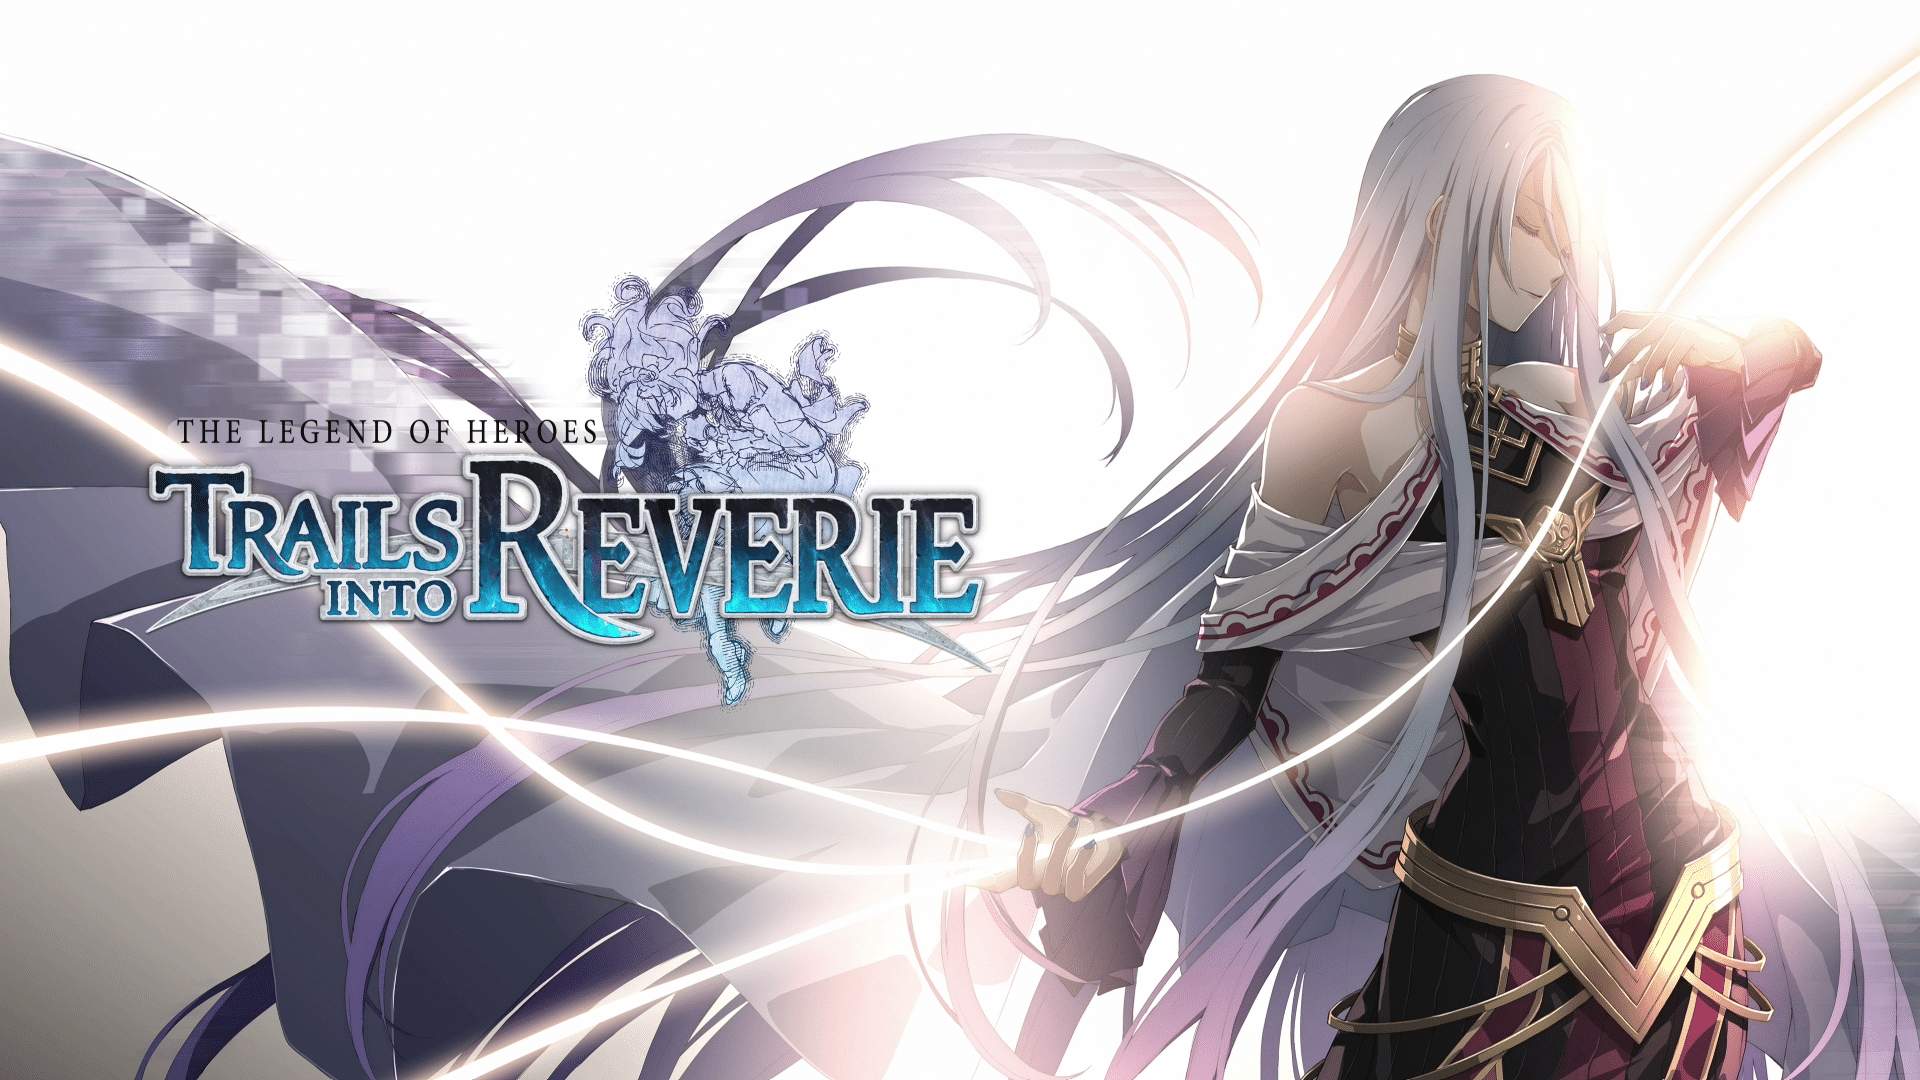 The Legend of Heroes: Trails into Reverie Review 2342323423